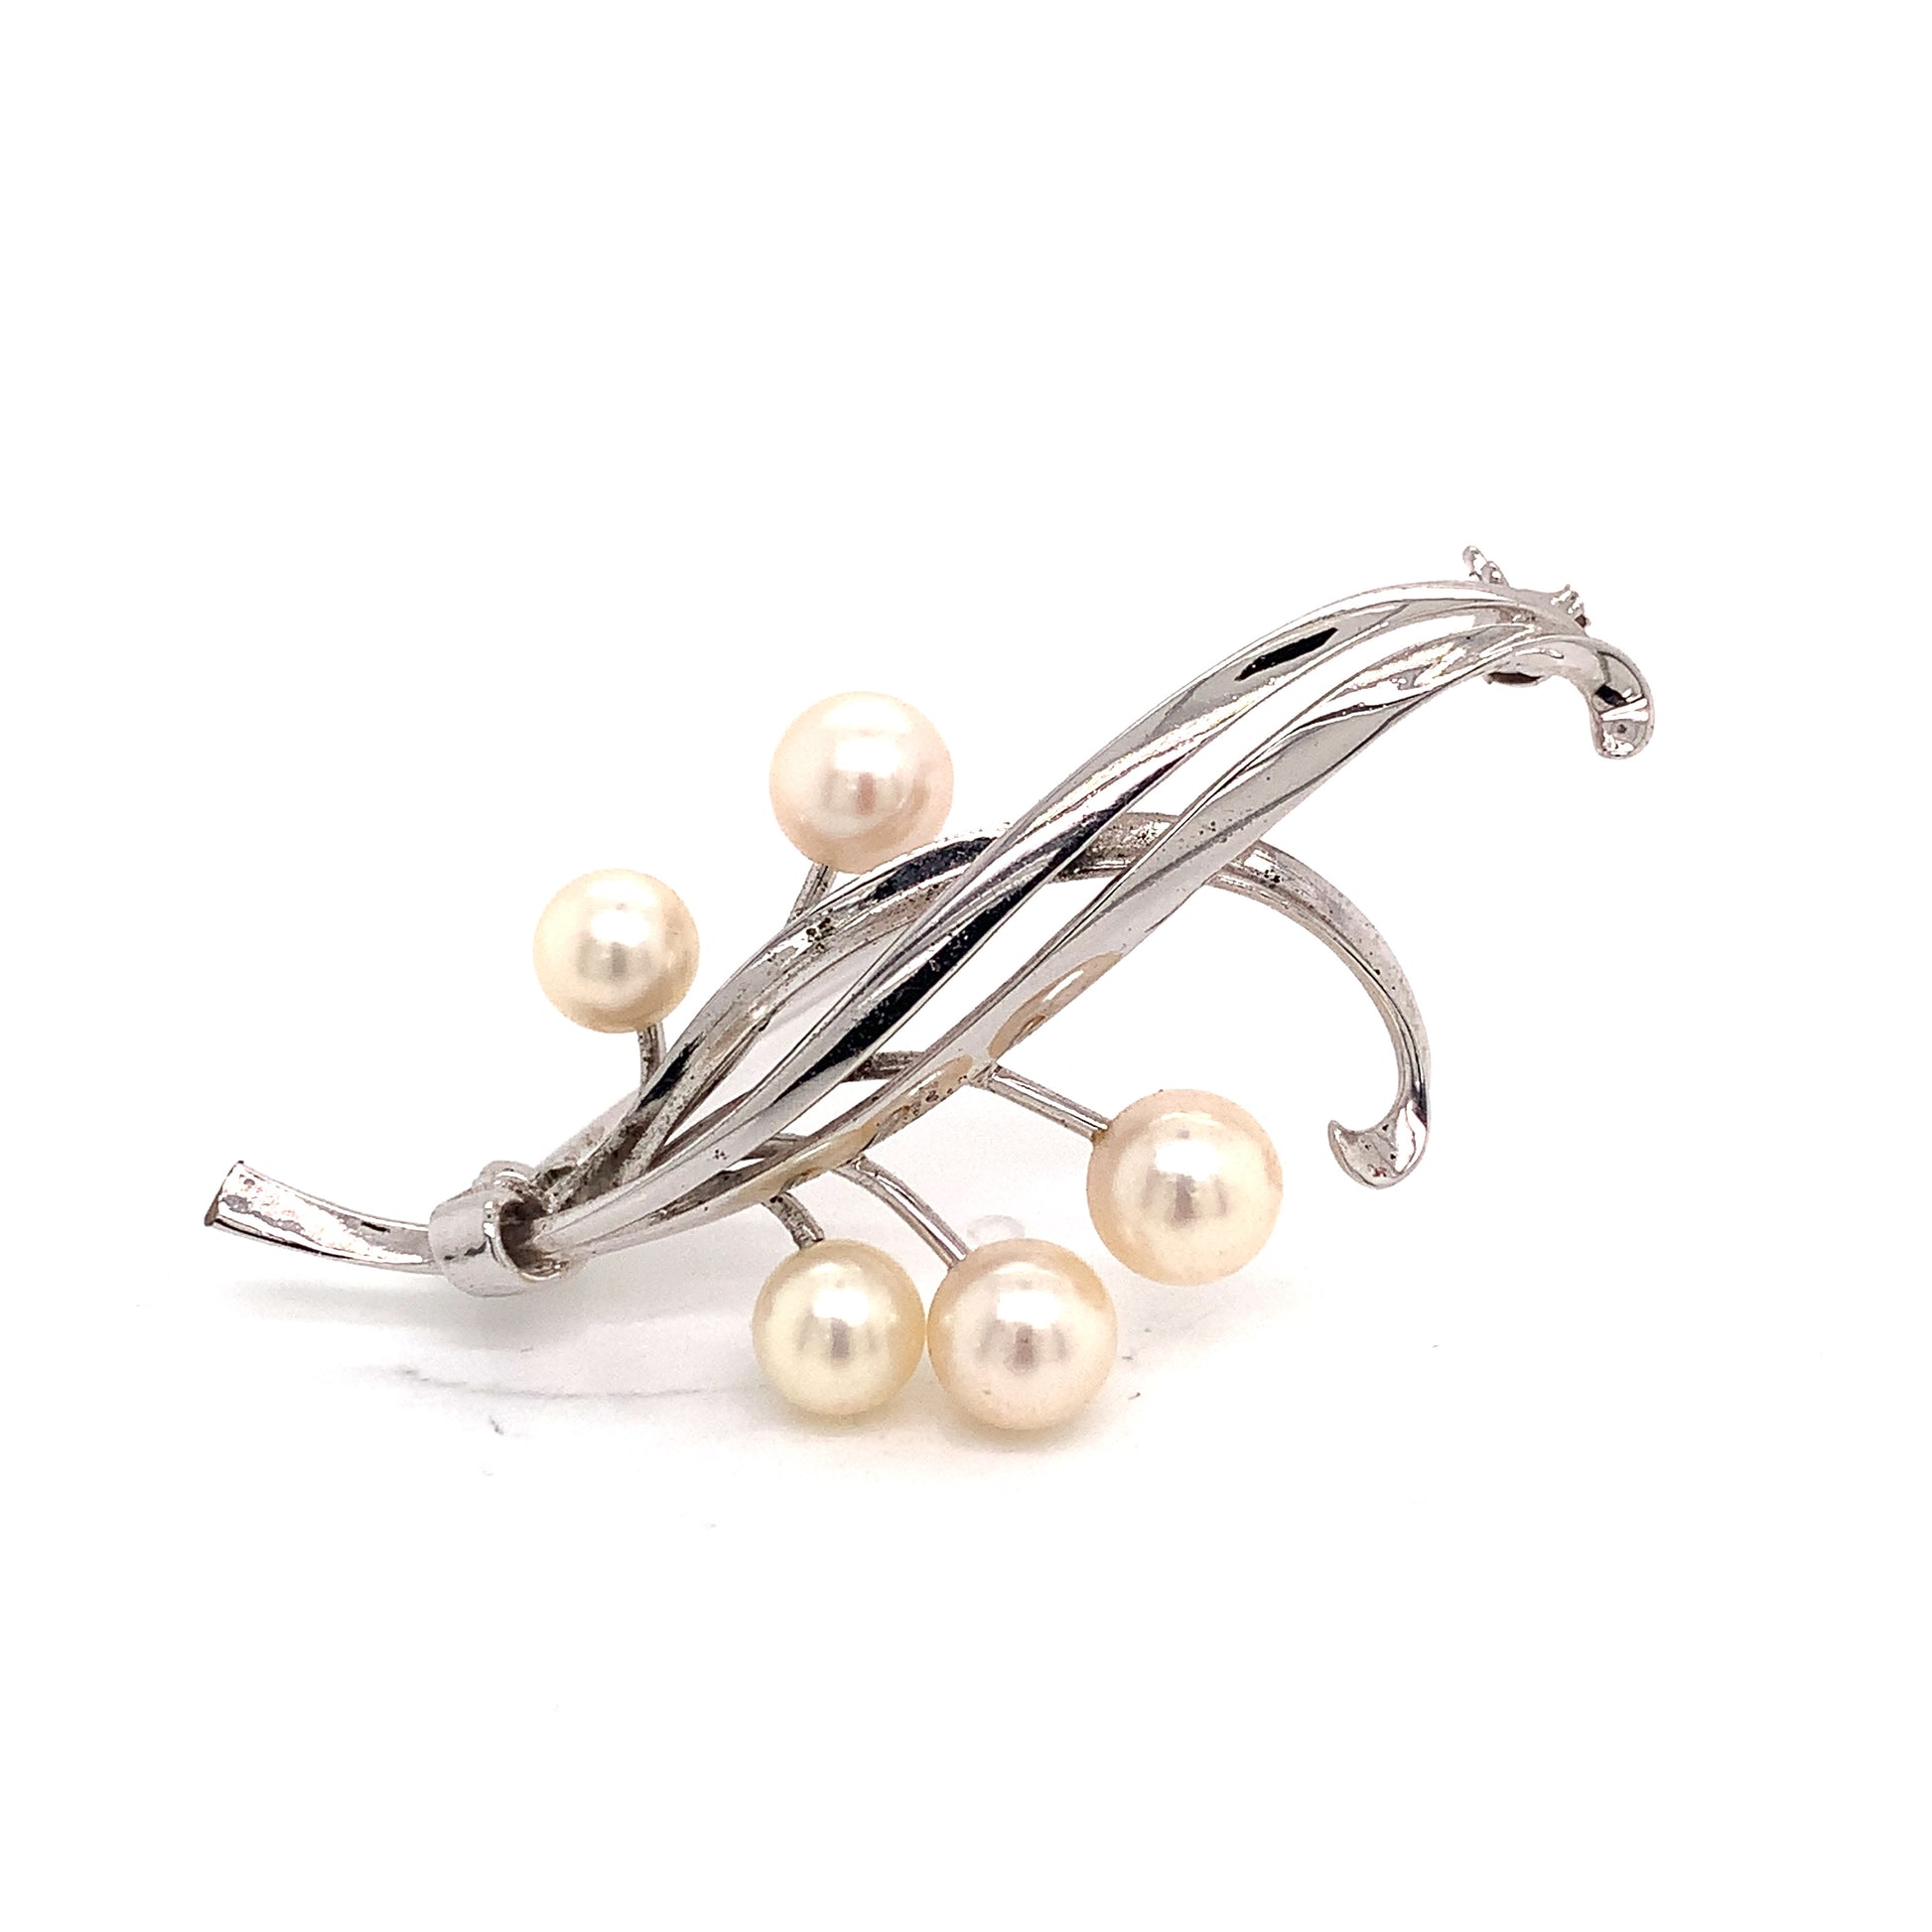 Colored Stone / Pearl Pins & Brooches 001-326-00422, Joint Venture Estate  Jewelry